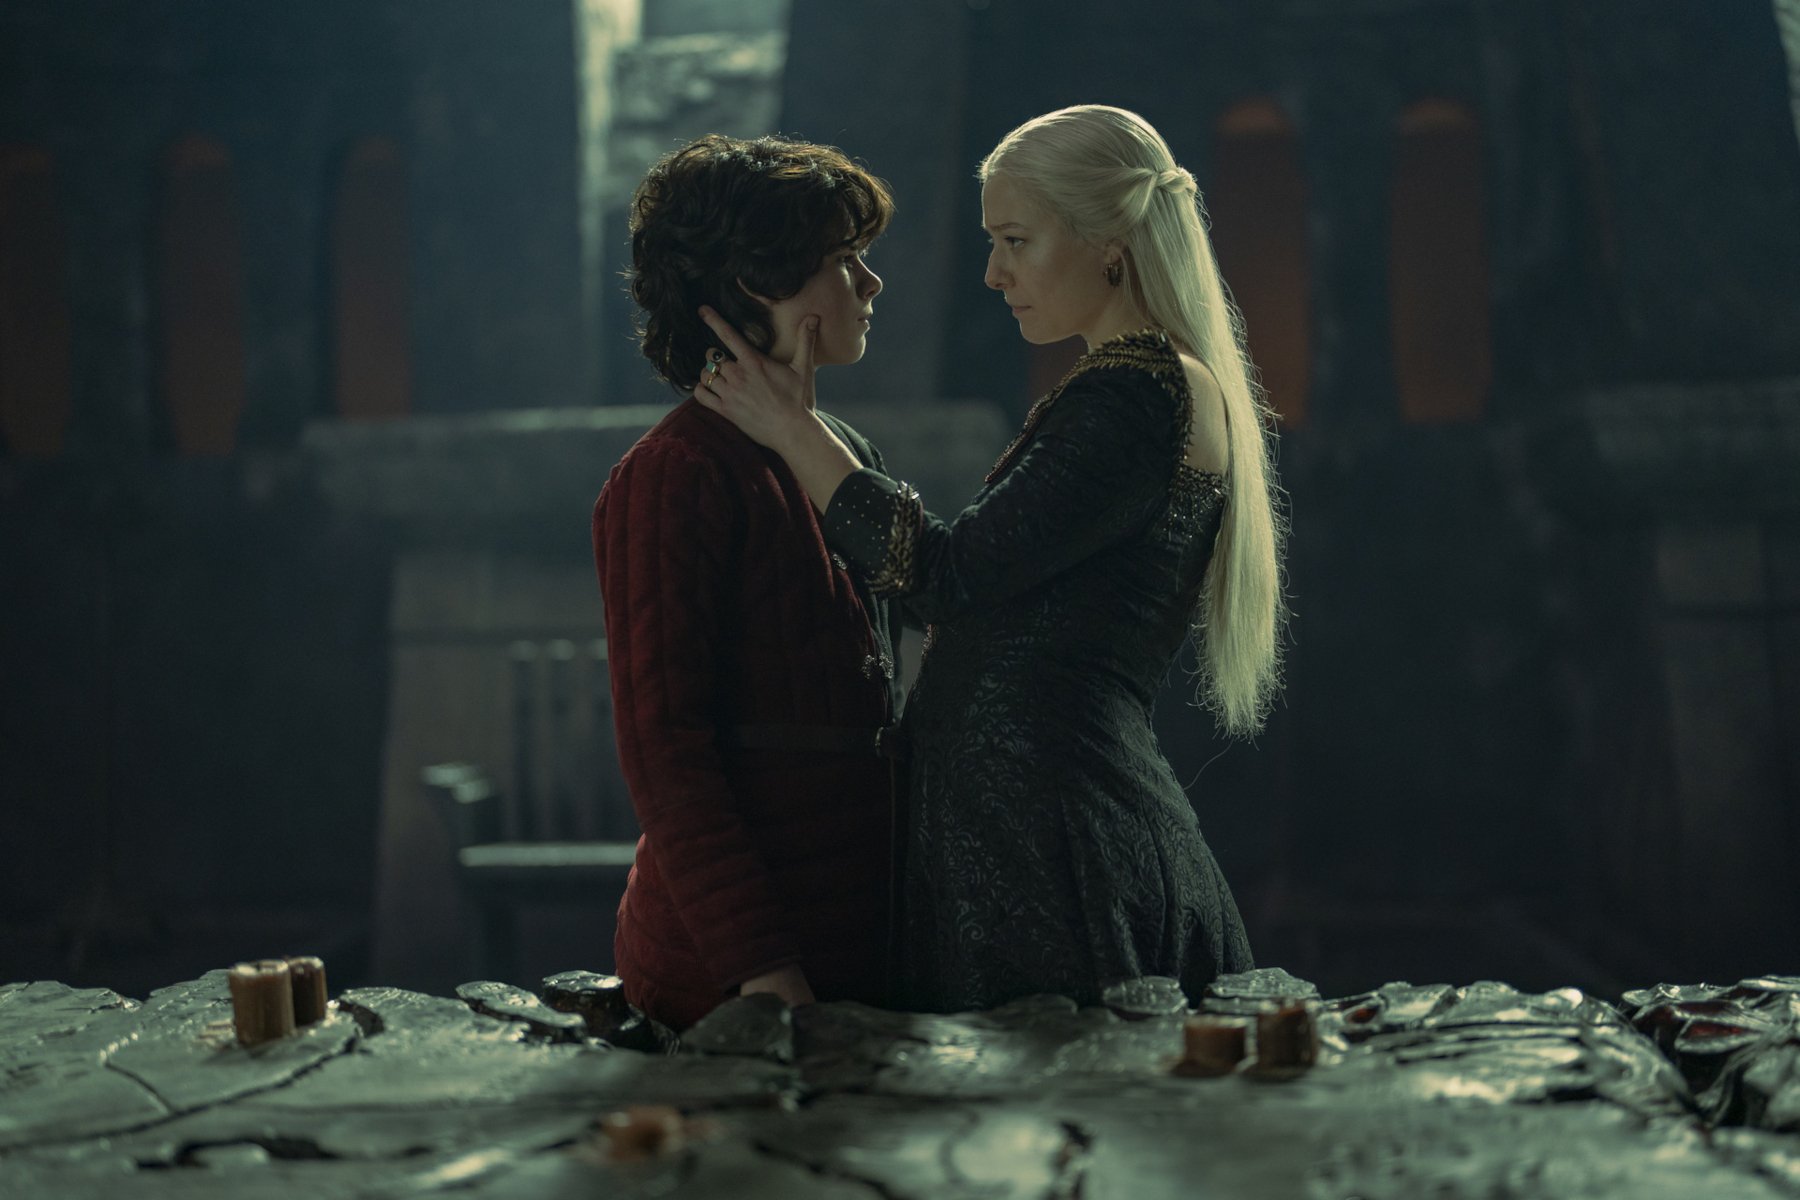 Elliot Grihault and Emma D'Arcy as Lucerys and Rhaenyra Targaryen in 'House of the Dragon' Season 1 for our death list.